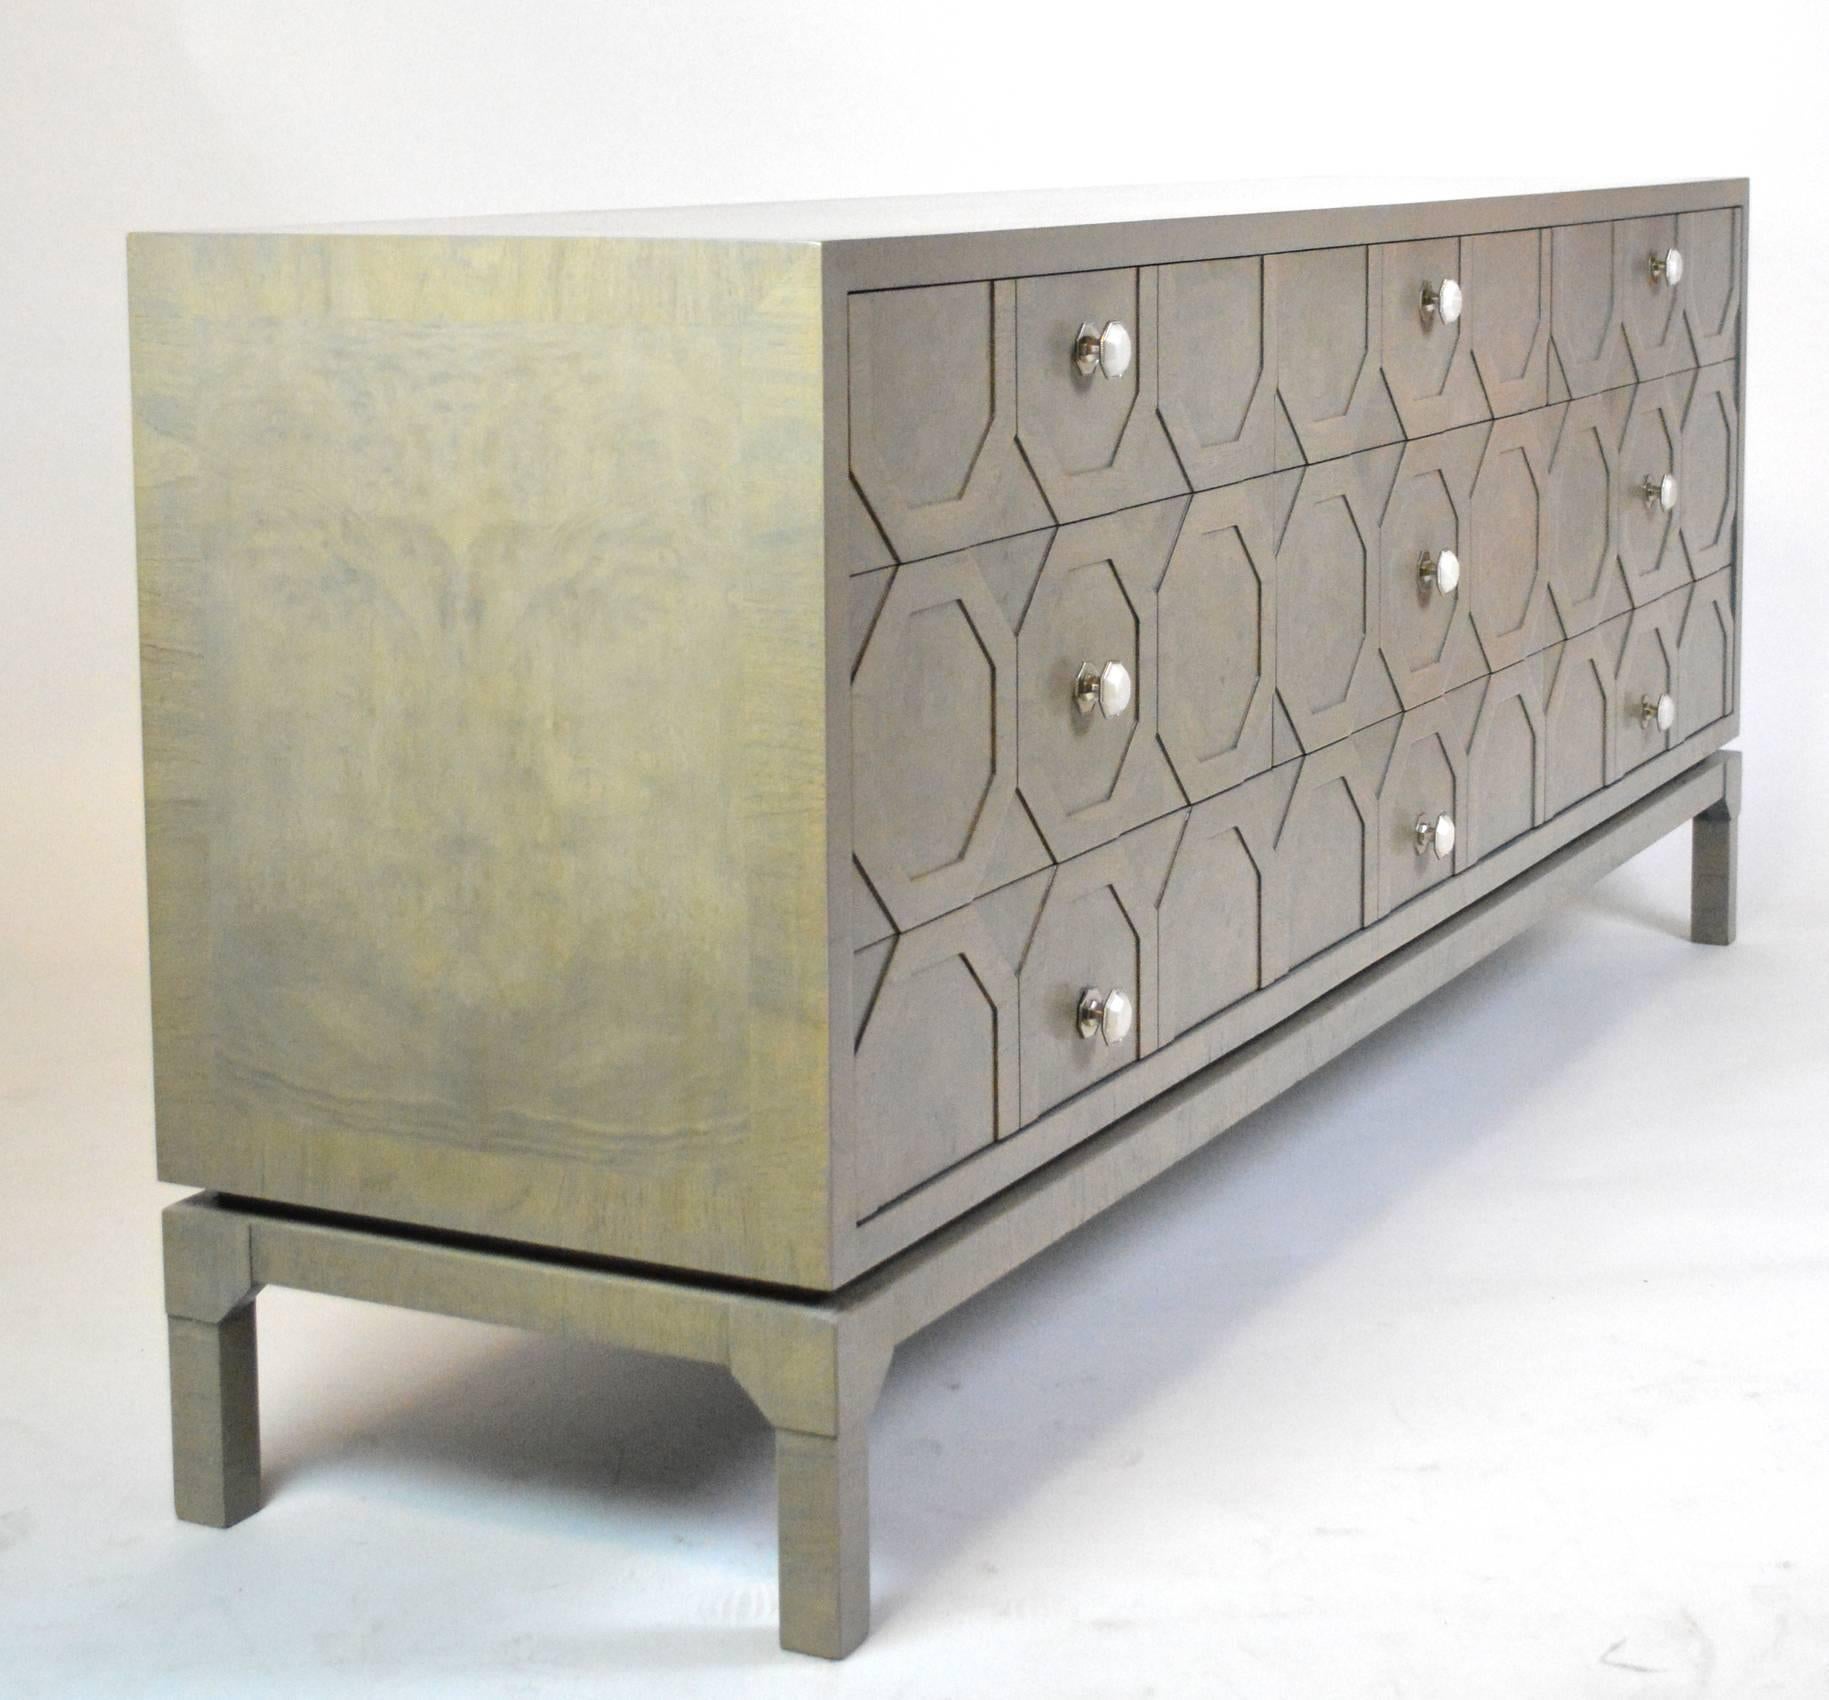 A rare nine-drawer dresser with octagonal lattice relief detail on the drawer fronts. The upper case floats on a separate base. Burled wood refinished in a silver gray stain.